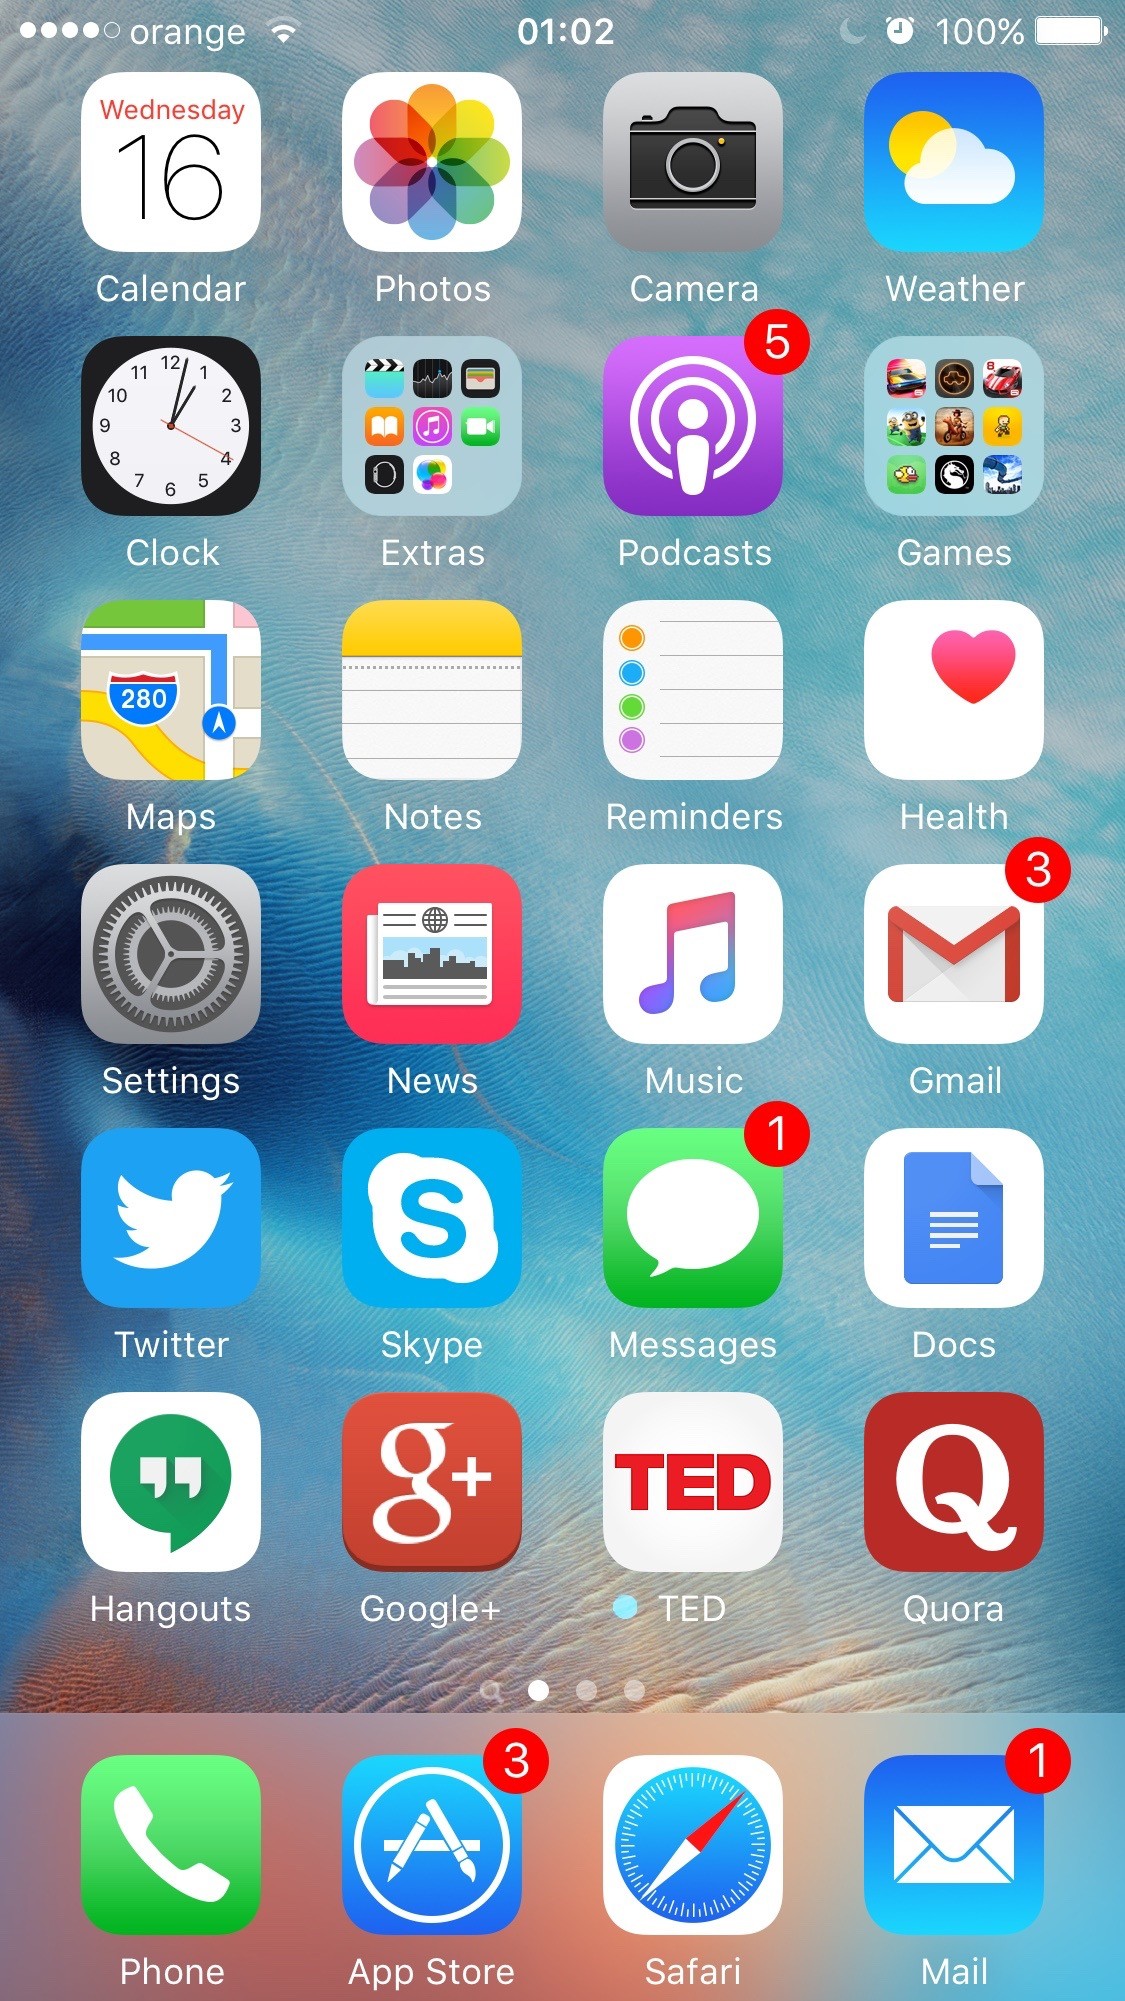 iOS 9 first look: here's what's new in Apple's public beta | The Verge